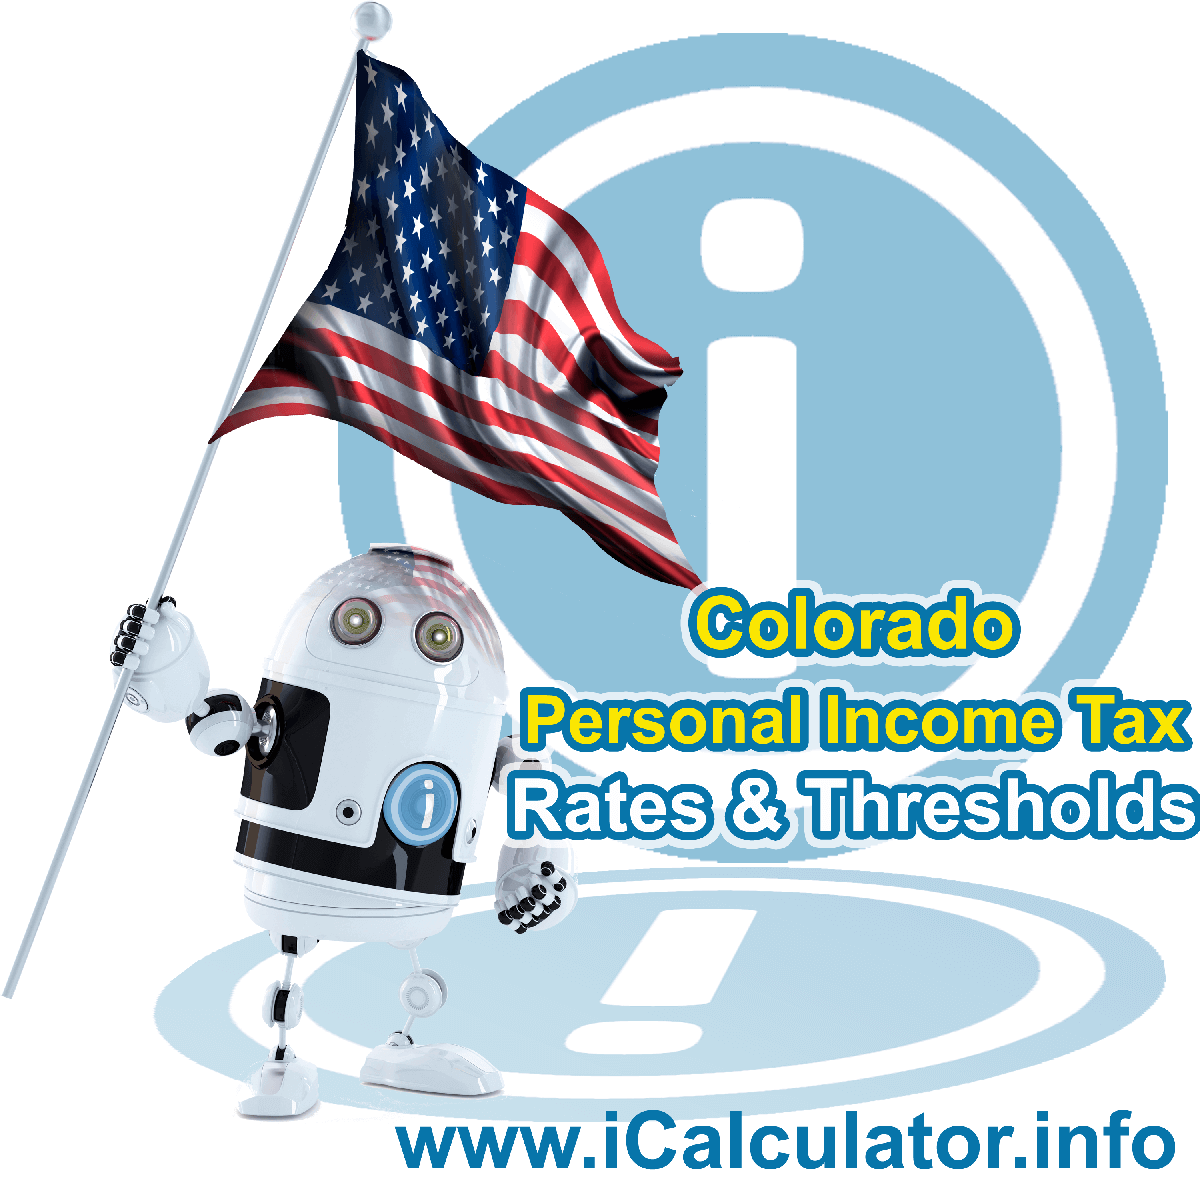 Colorado State Tax Tables 2018. This image displays details of the Colorado State Tax Tables for the 2018 tax return year which is provided in support of the 2018 US Tax Calculator